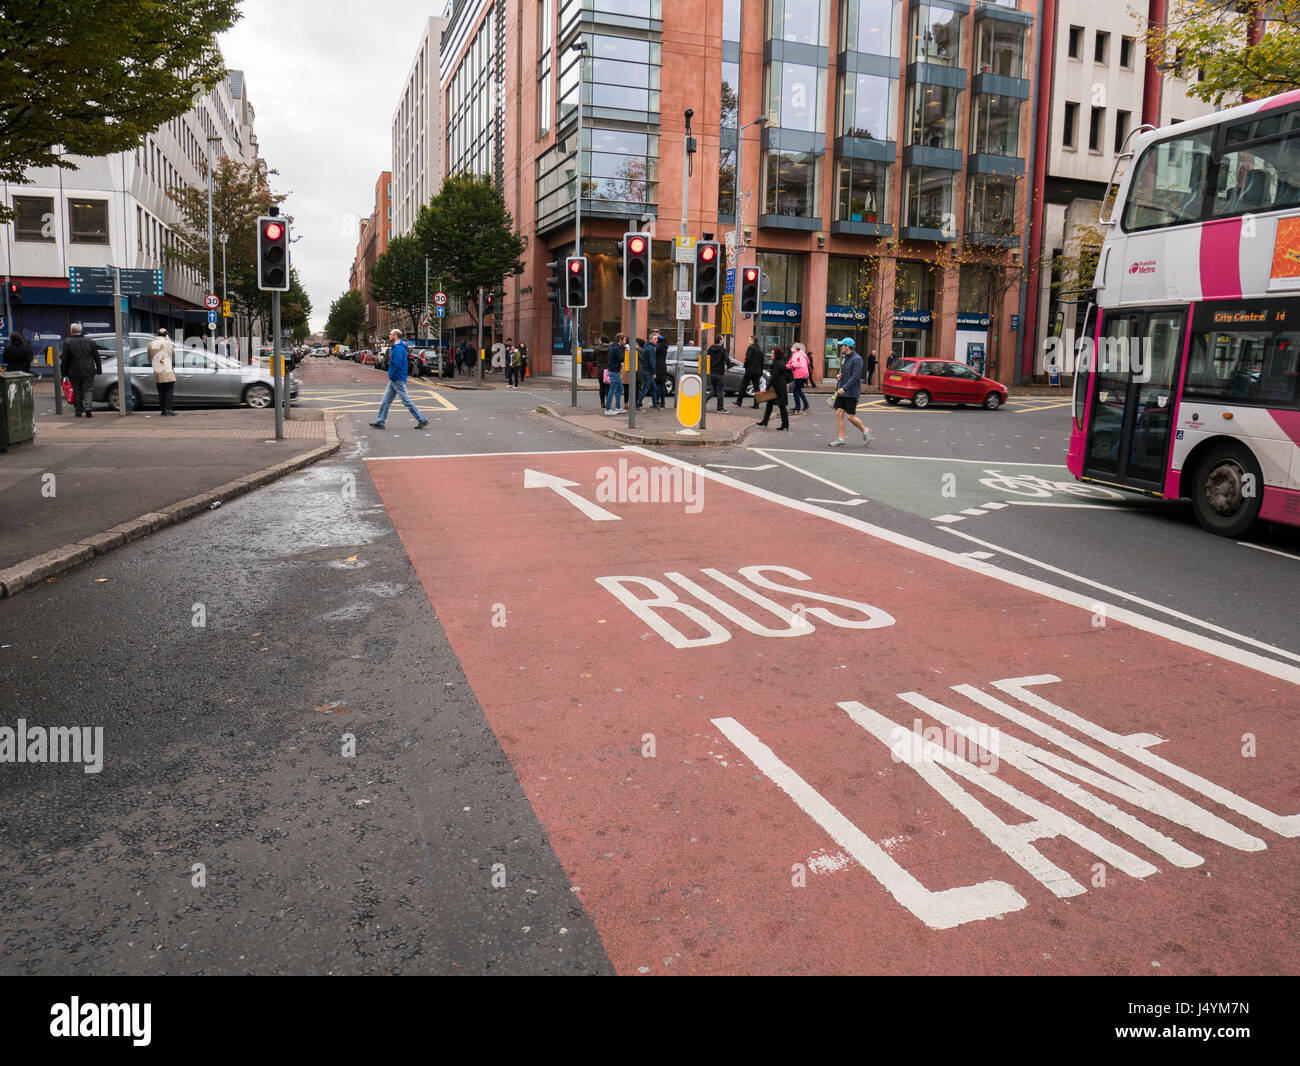 Bus lane, Donegall Square East,, Belfast, Northern Ireland. This bus lane is known to have raised £1 million in fines over 2015/2016. Stock Photo